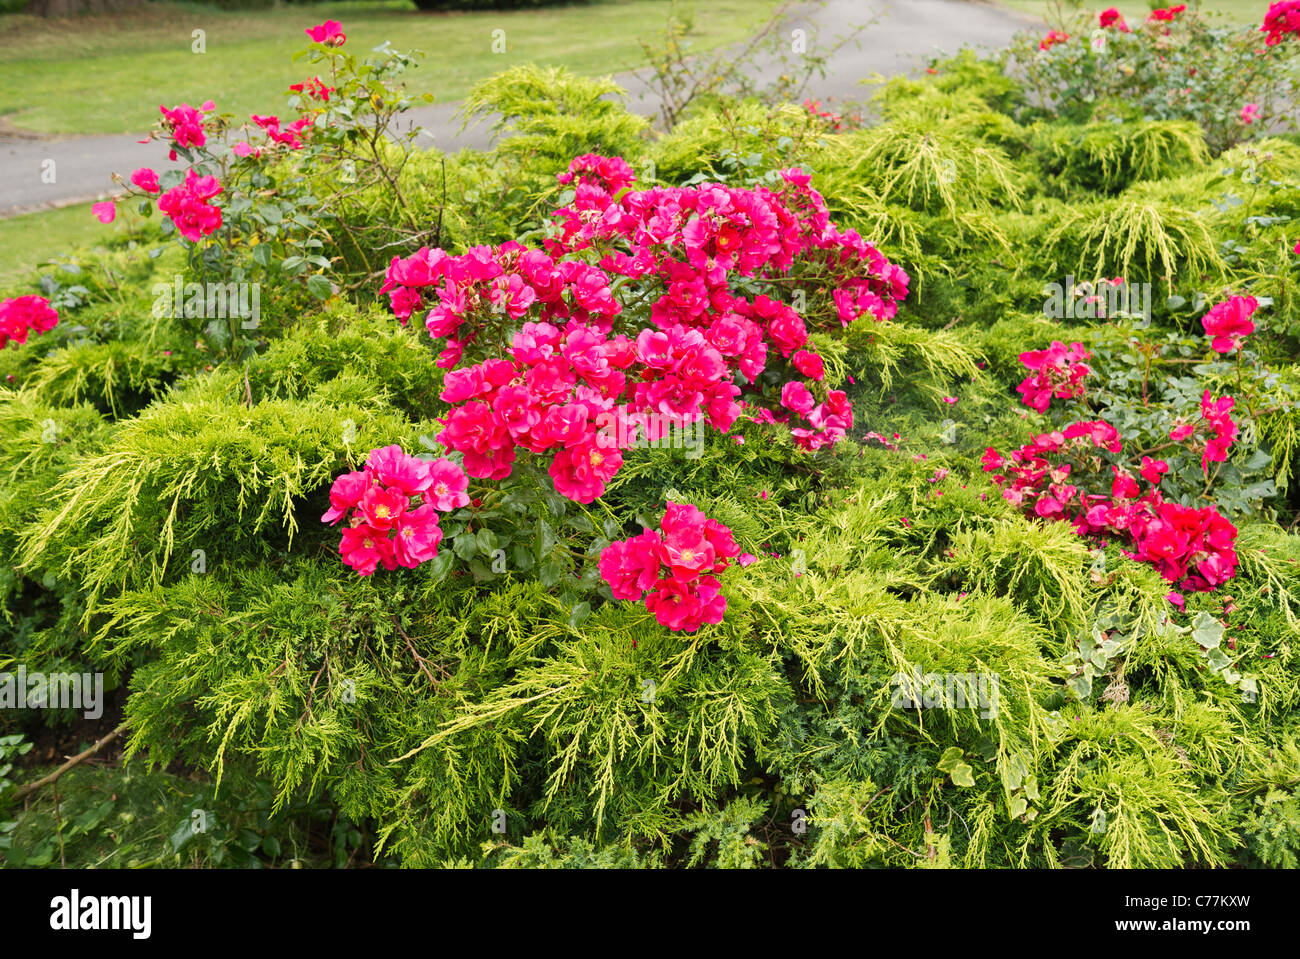 Mixed planting with evergreen prostrate conifers inter-planted with pink cluster-flowered roses Stock Photo